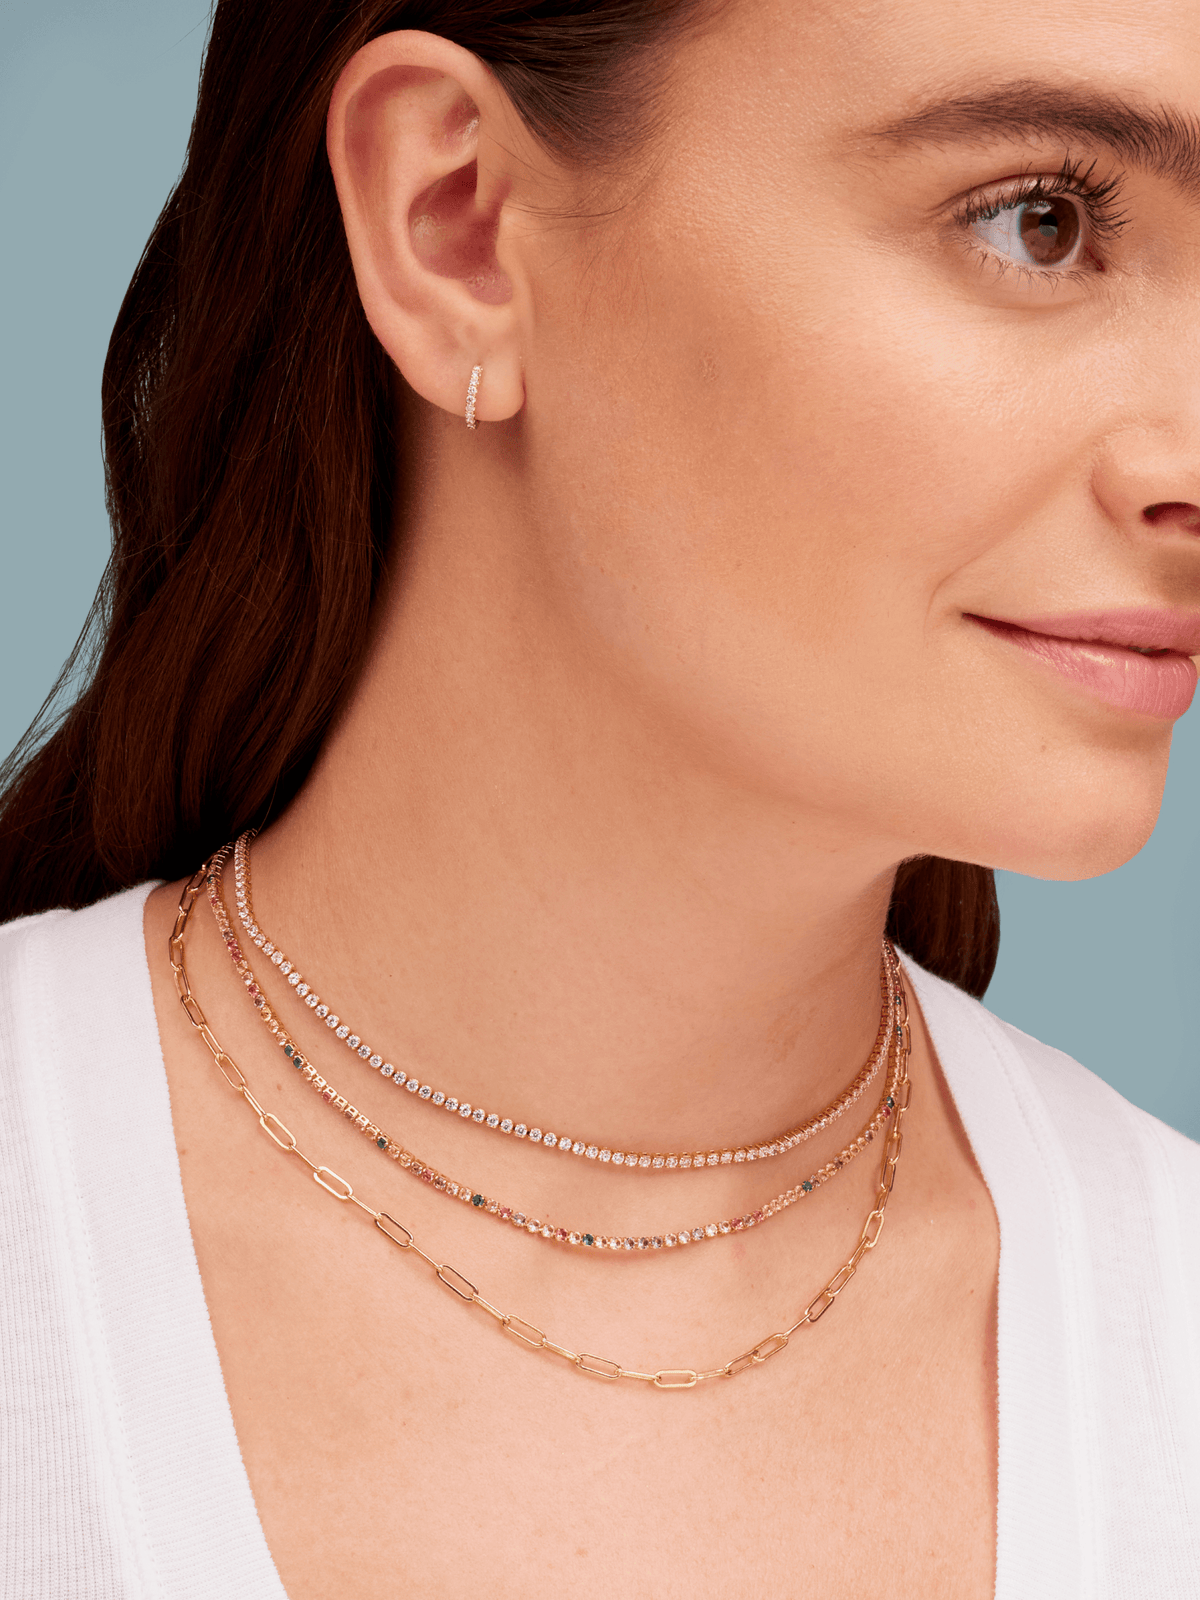 Gold CZ diamond tennis choker layered with gold paperclip necklace and rainbow CZ tennis choker